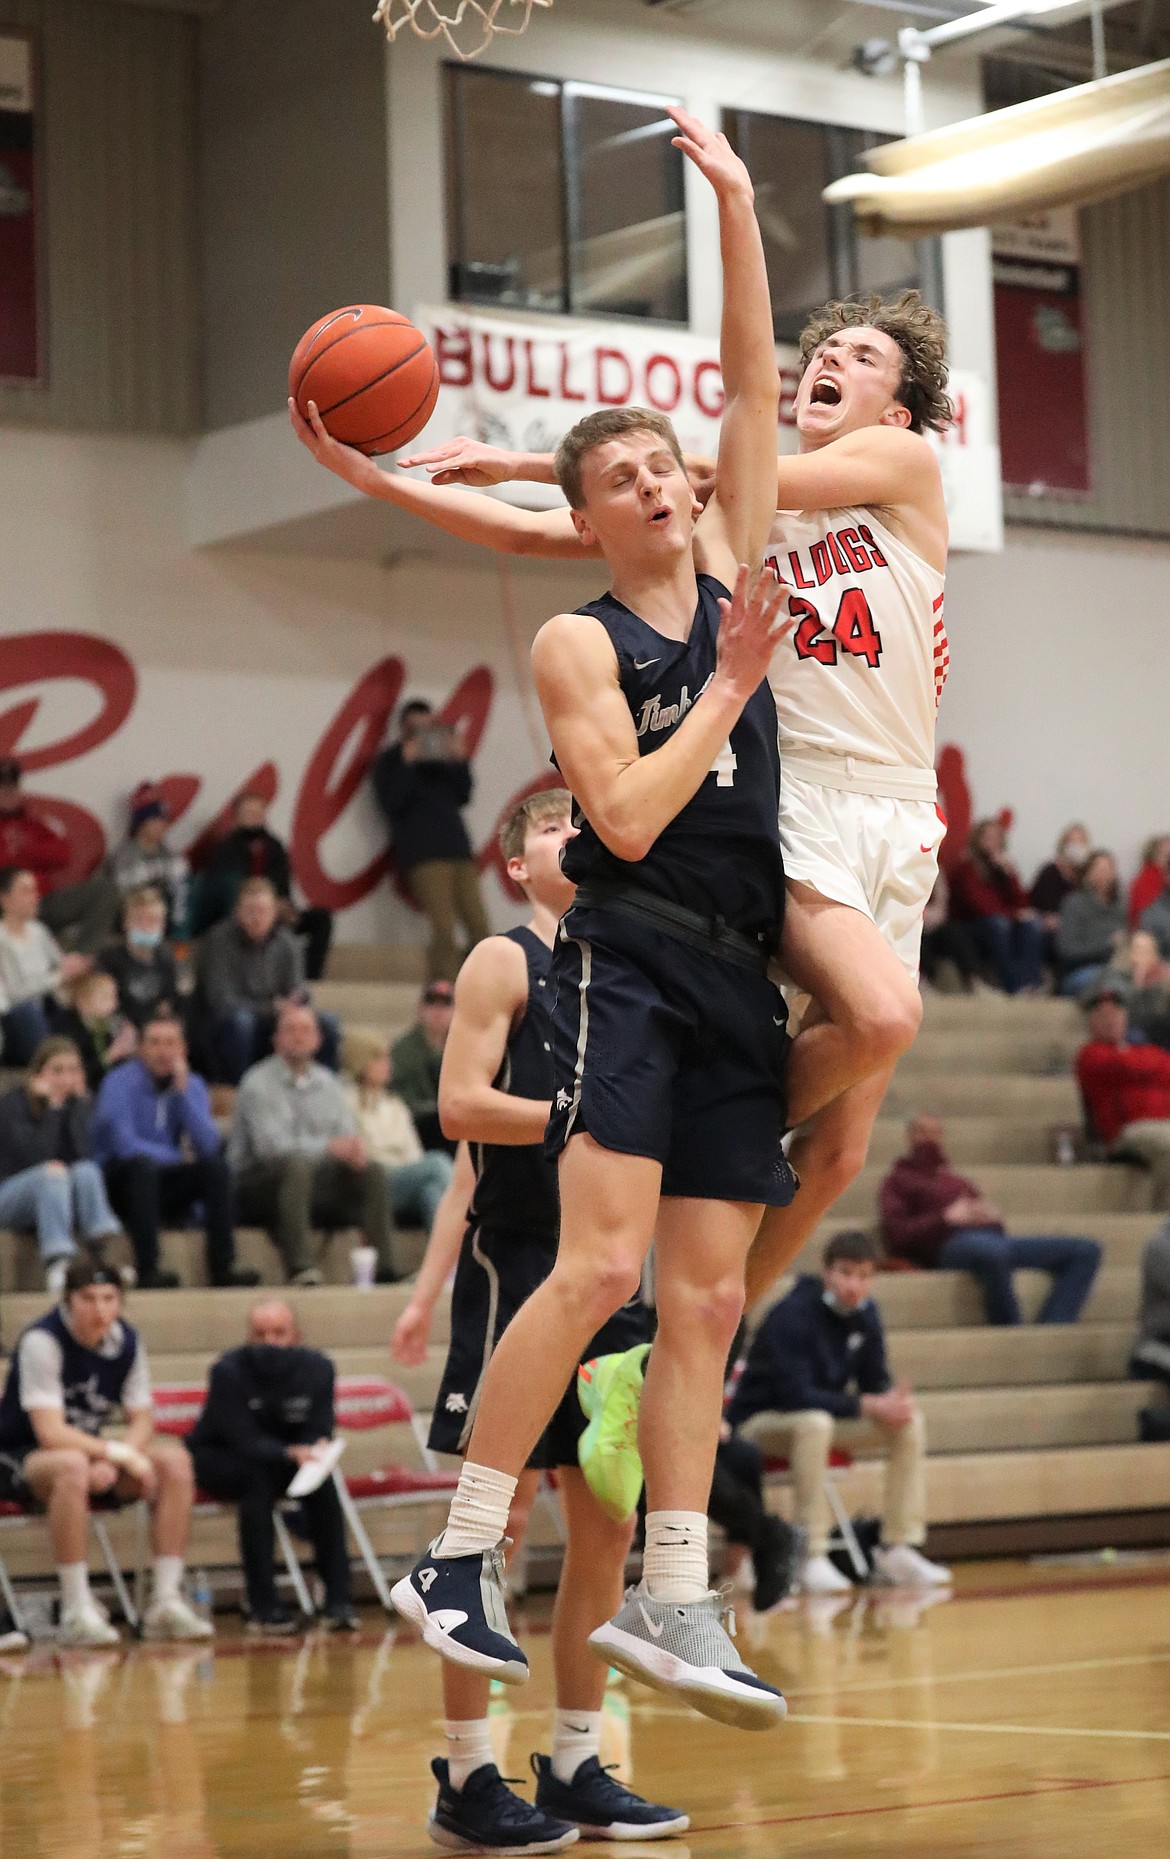 Randy Lane (right) fights through contact to attempt a layup on Tuesday.